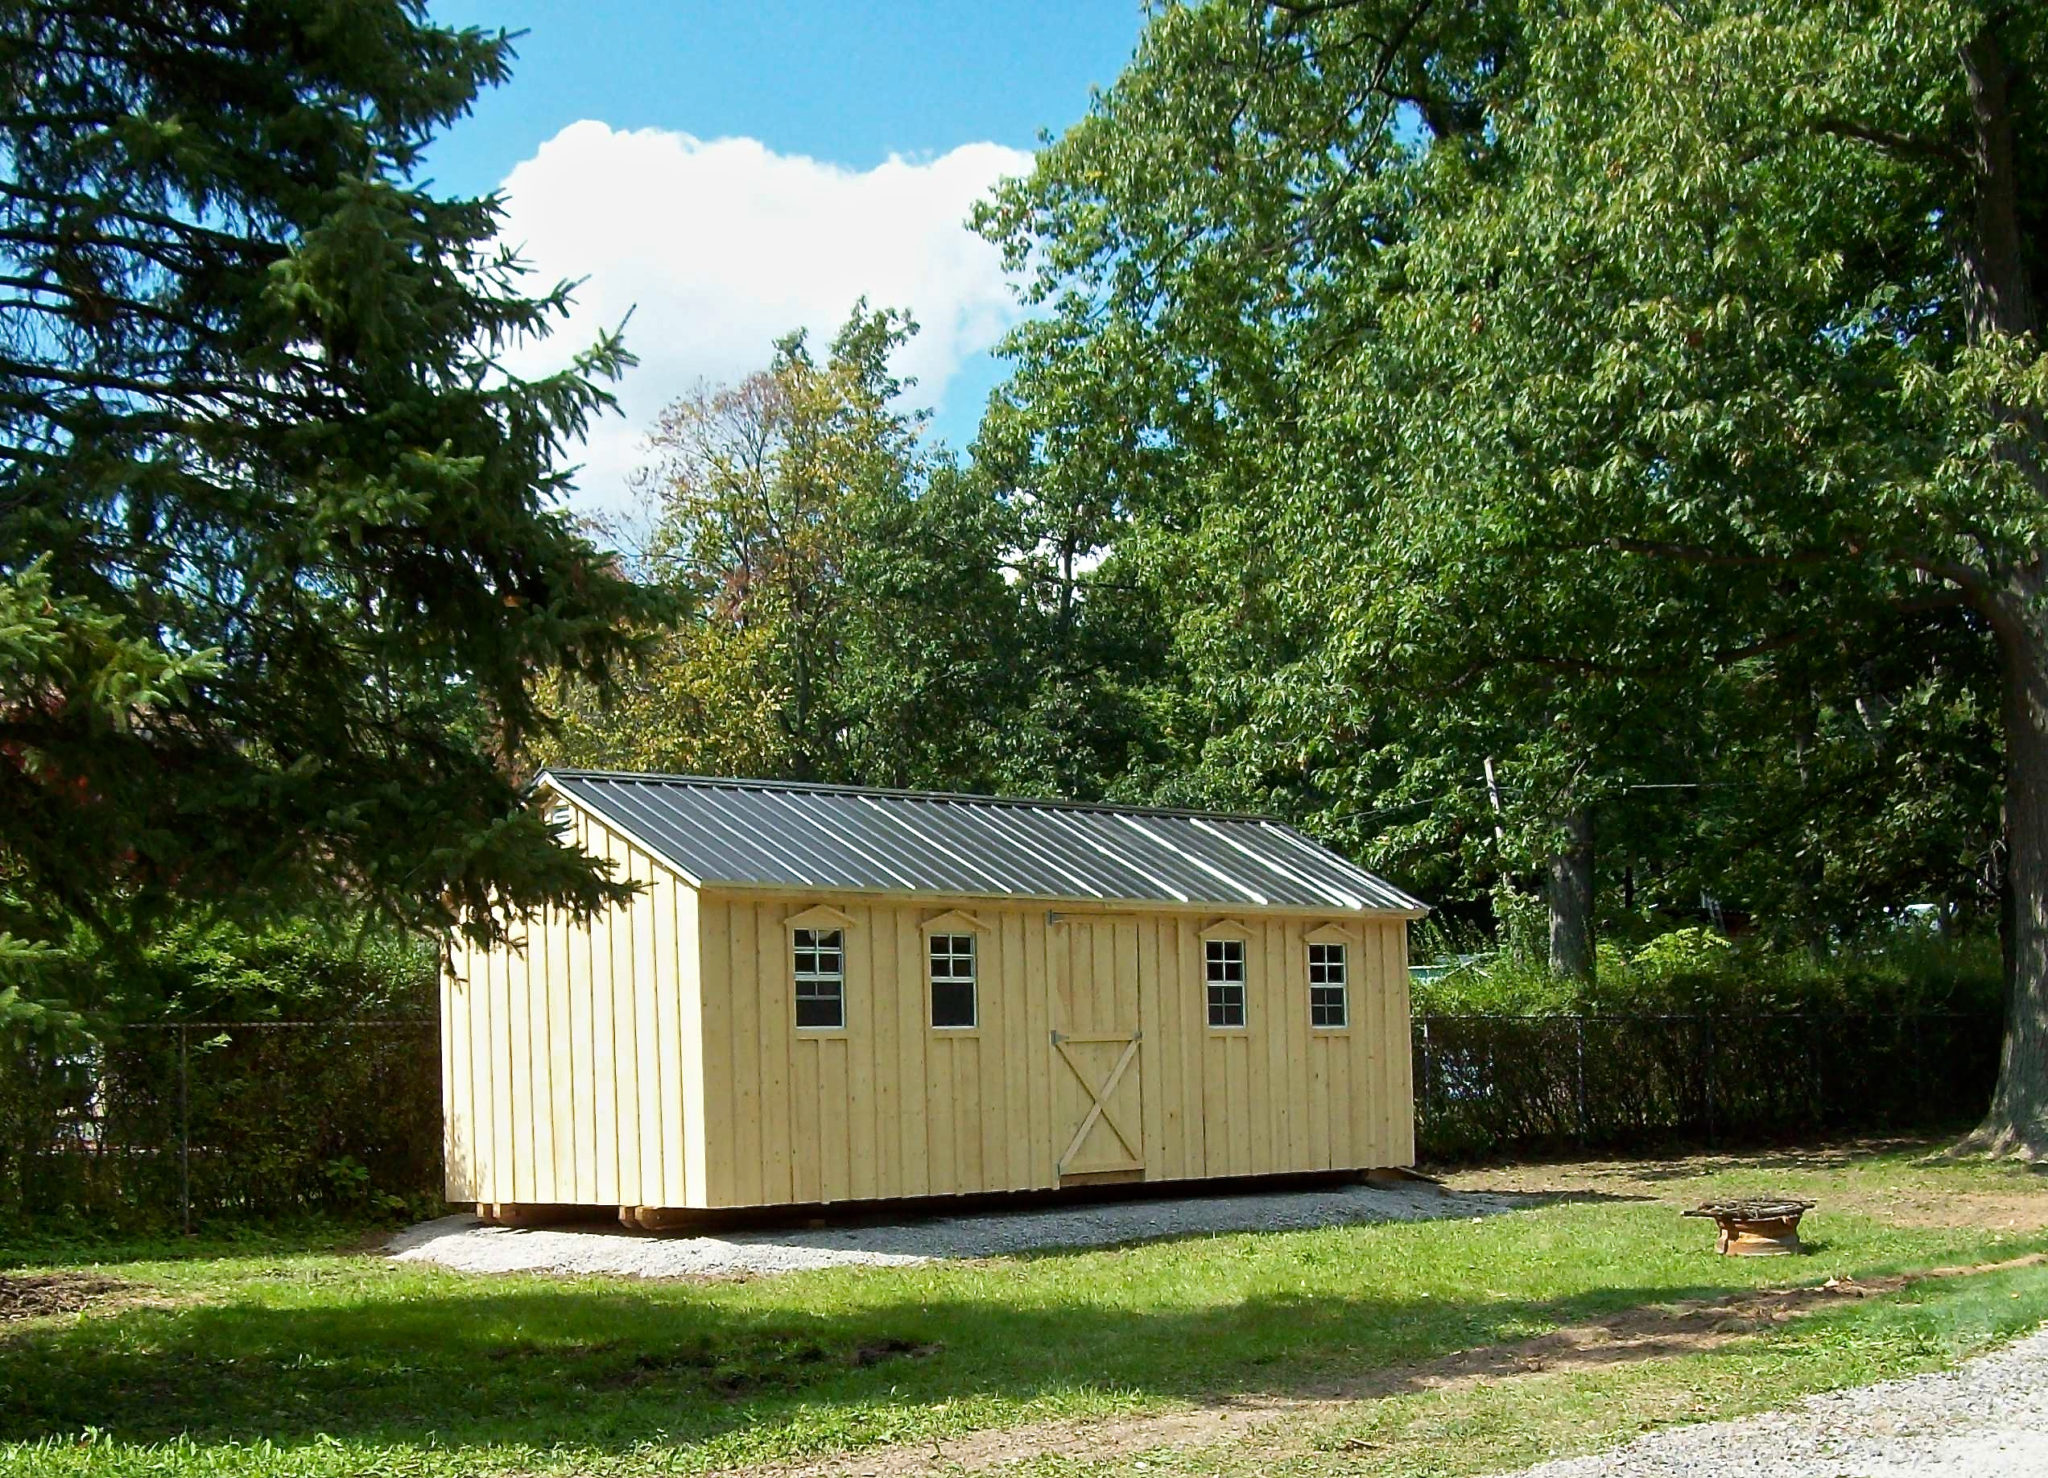 Amish Shed With Green Roof and a double door